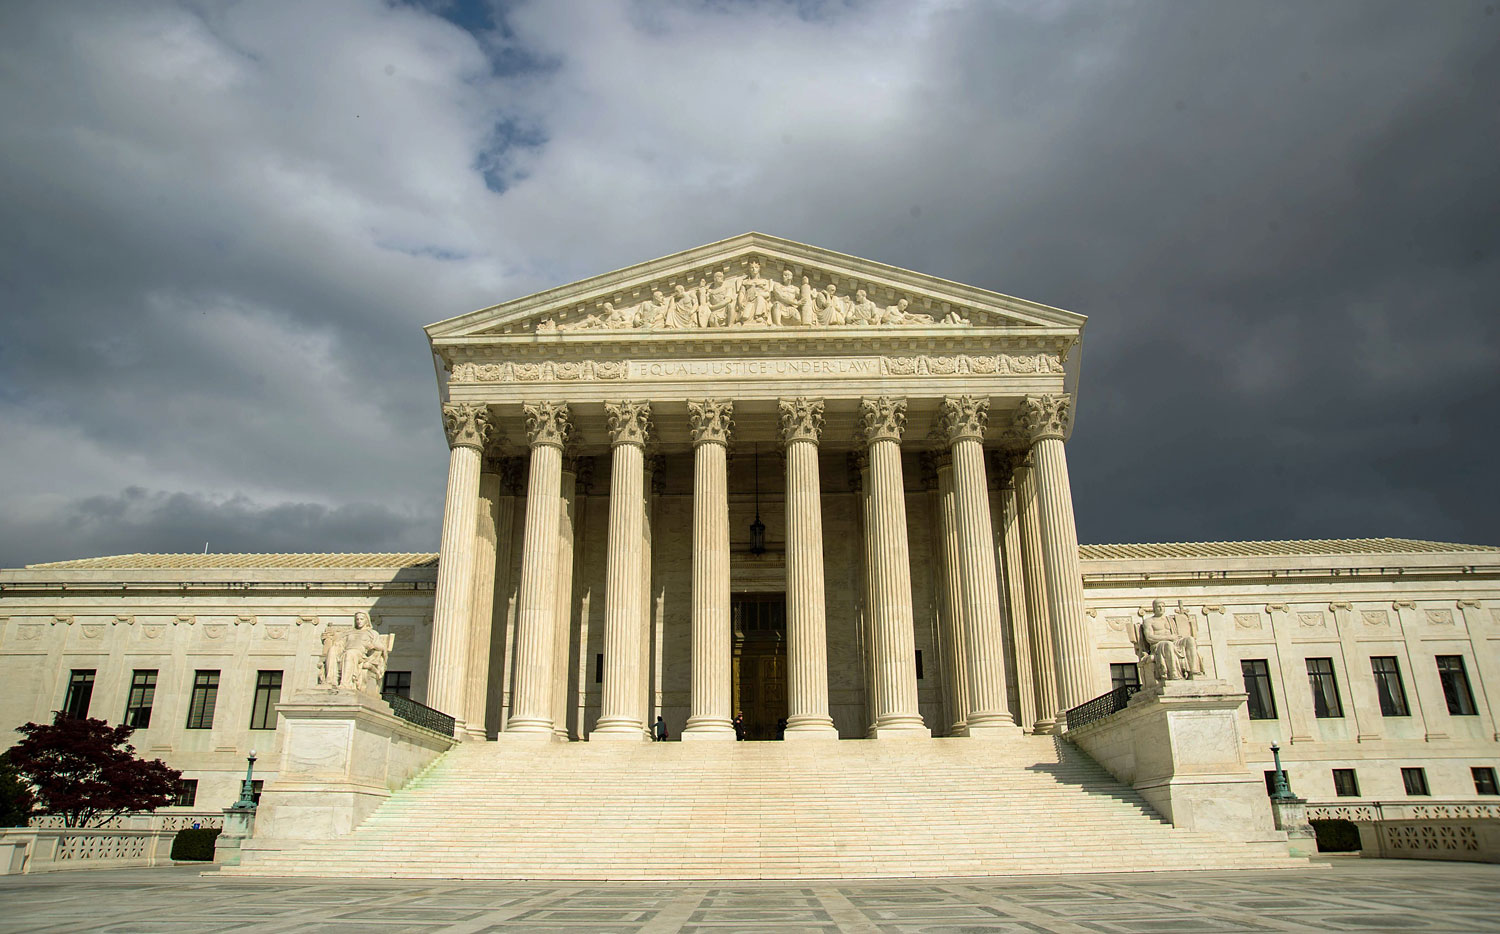 The US Supreme Court Building is seen in